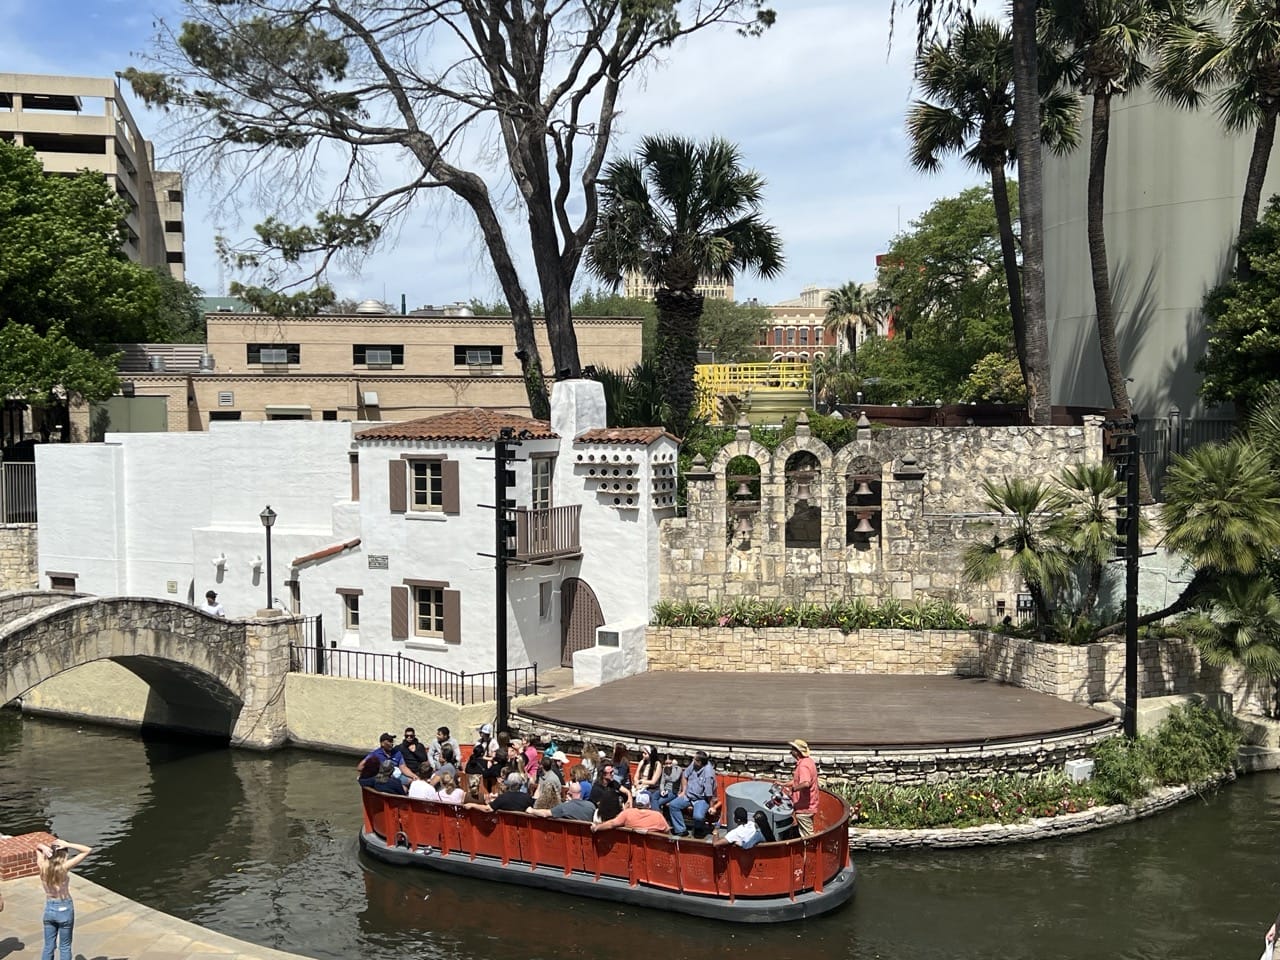 Arneson River Theater and river barge